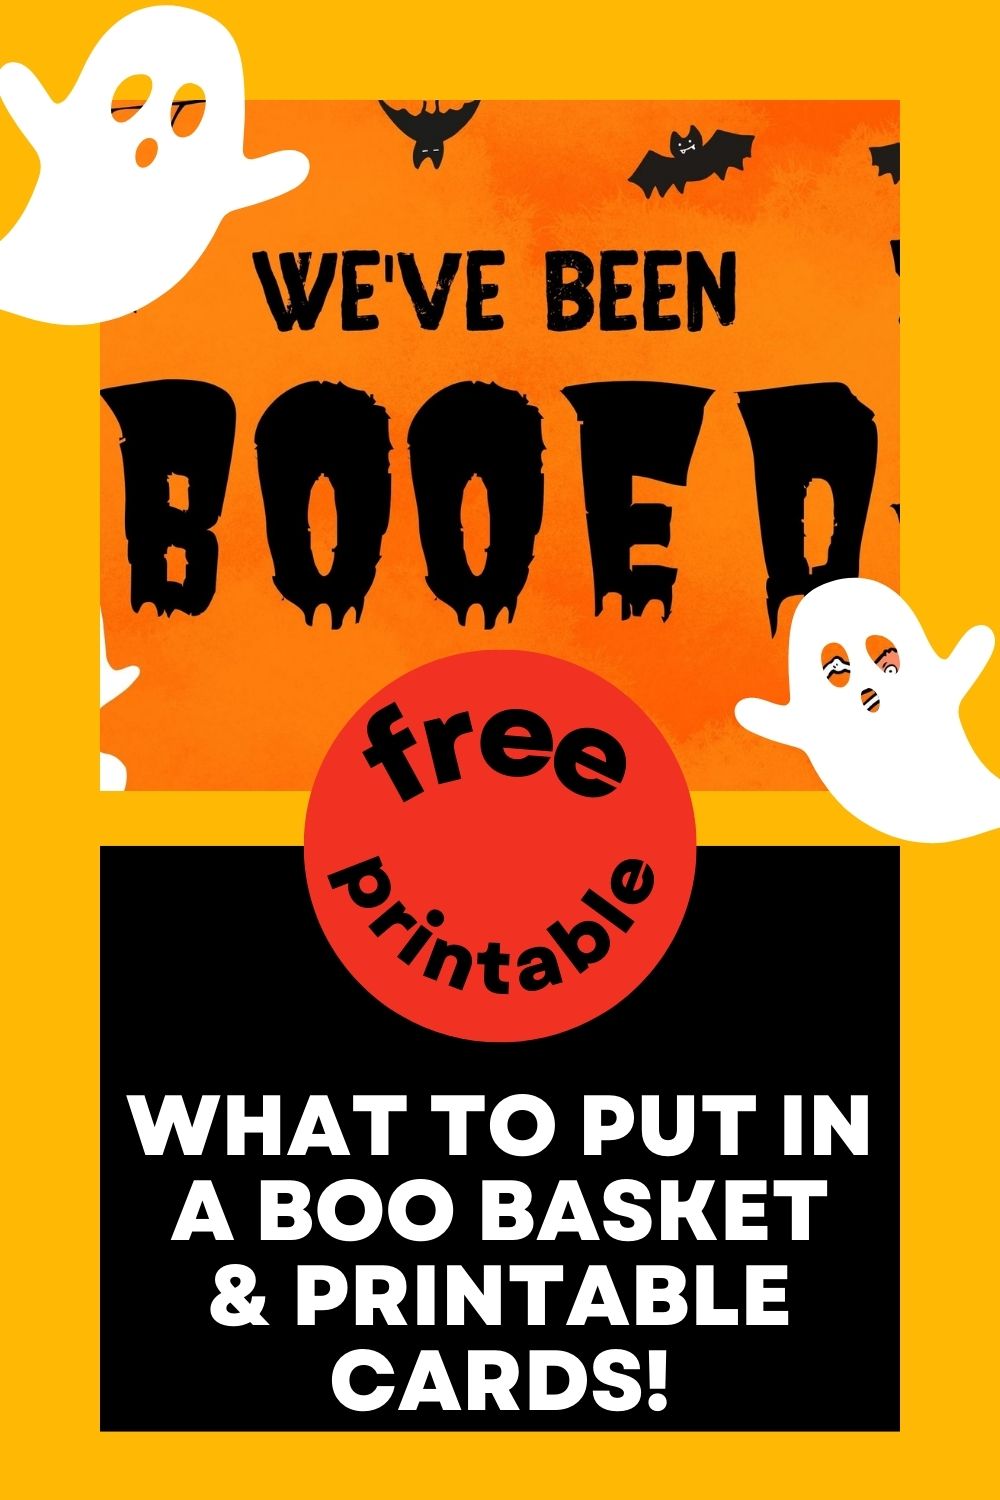 You've been booed. Get your free printable and basket ideas